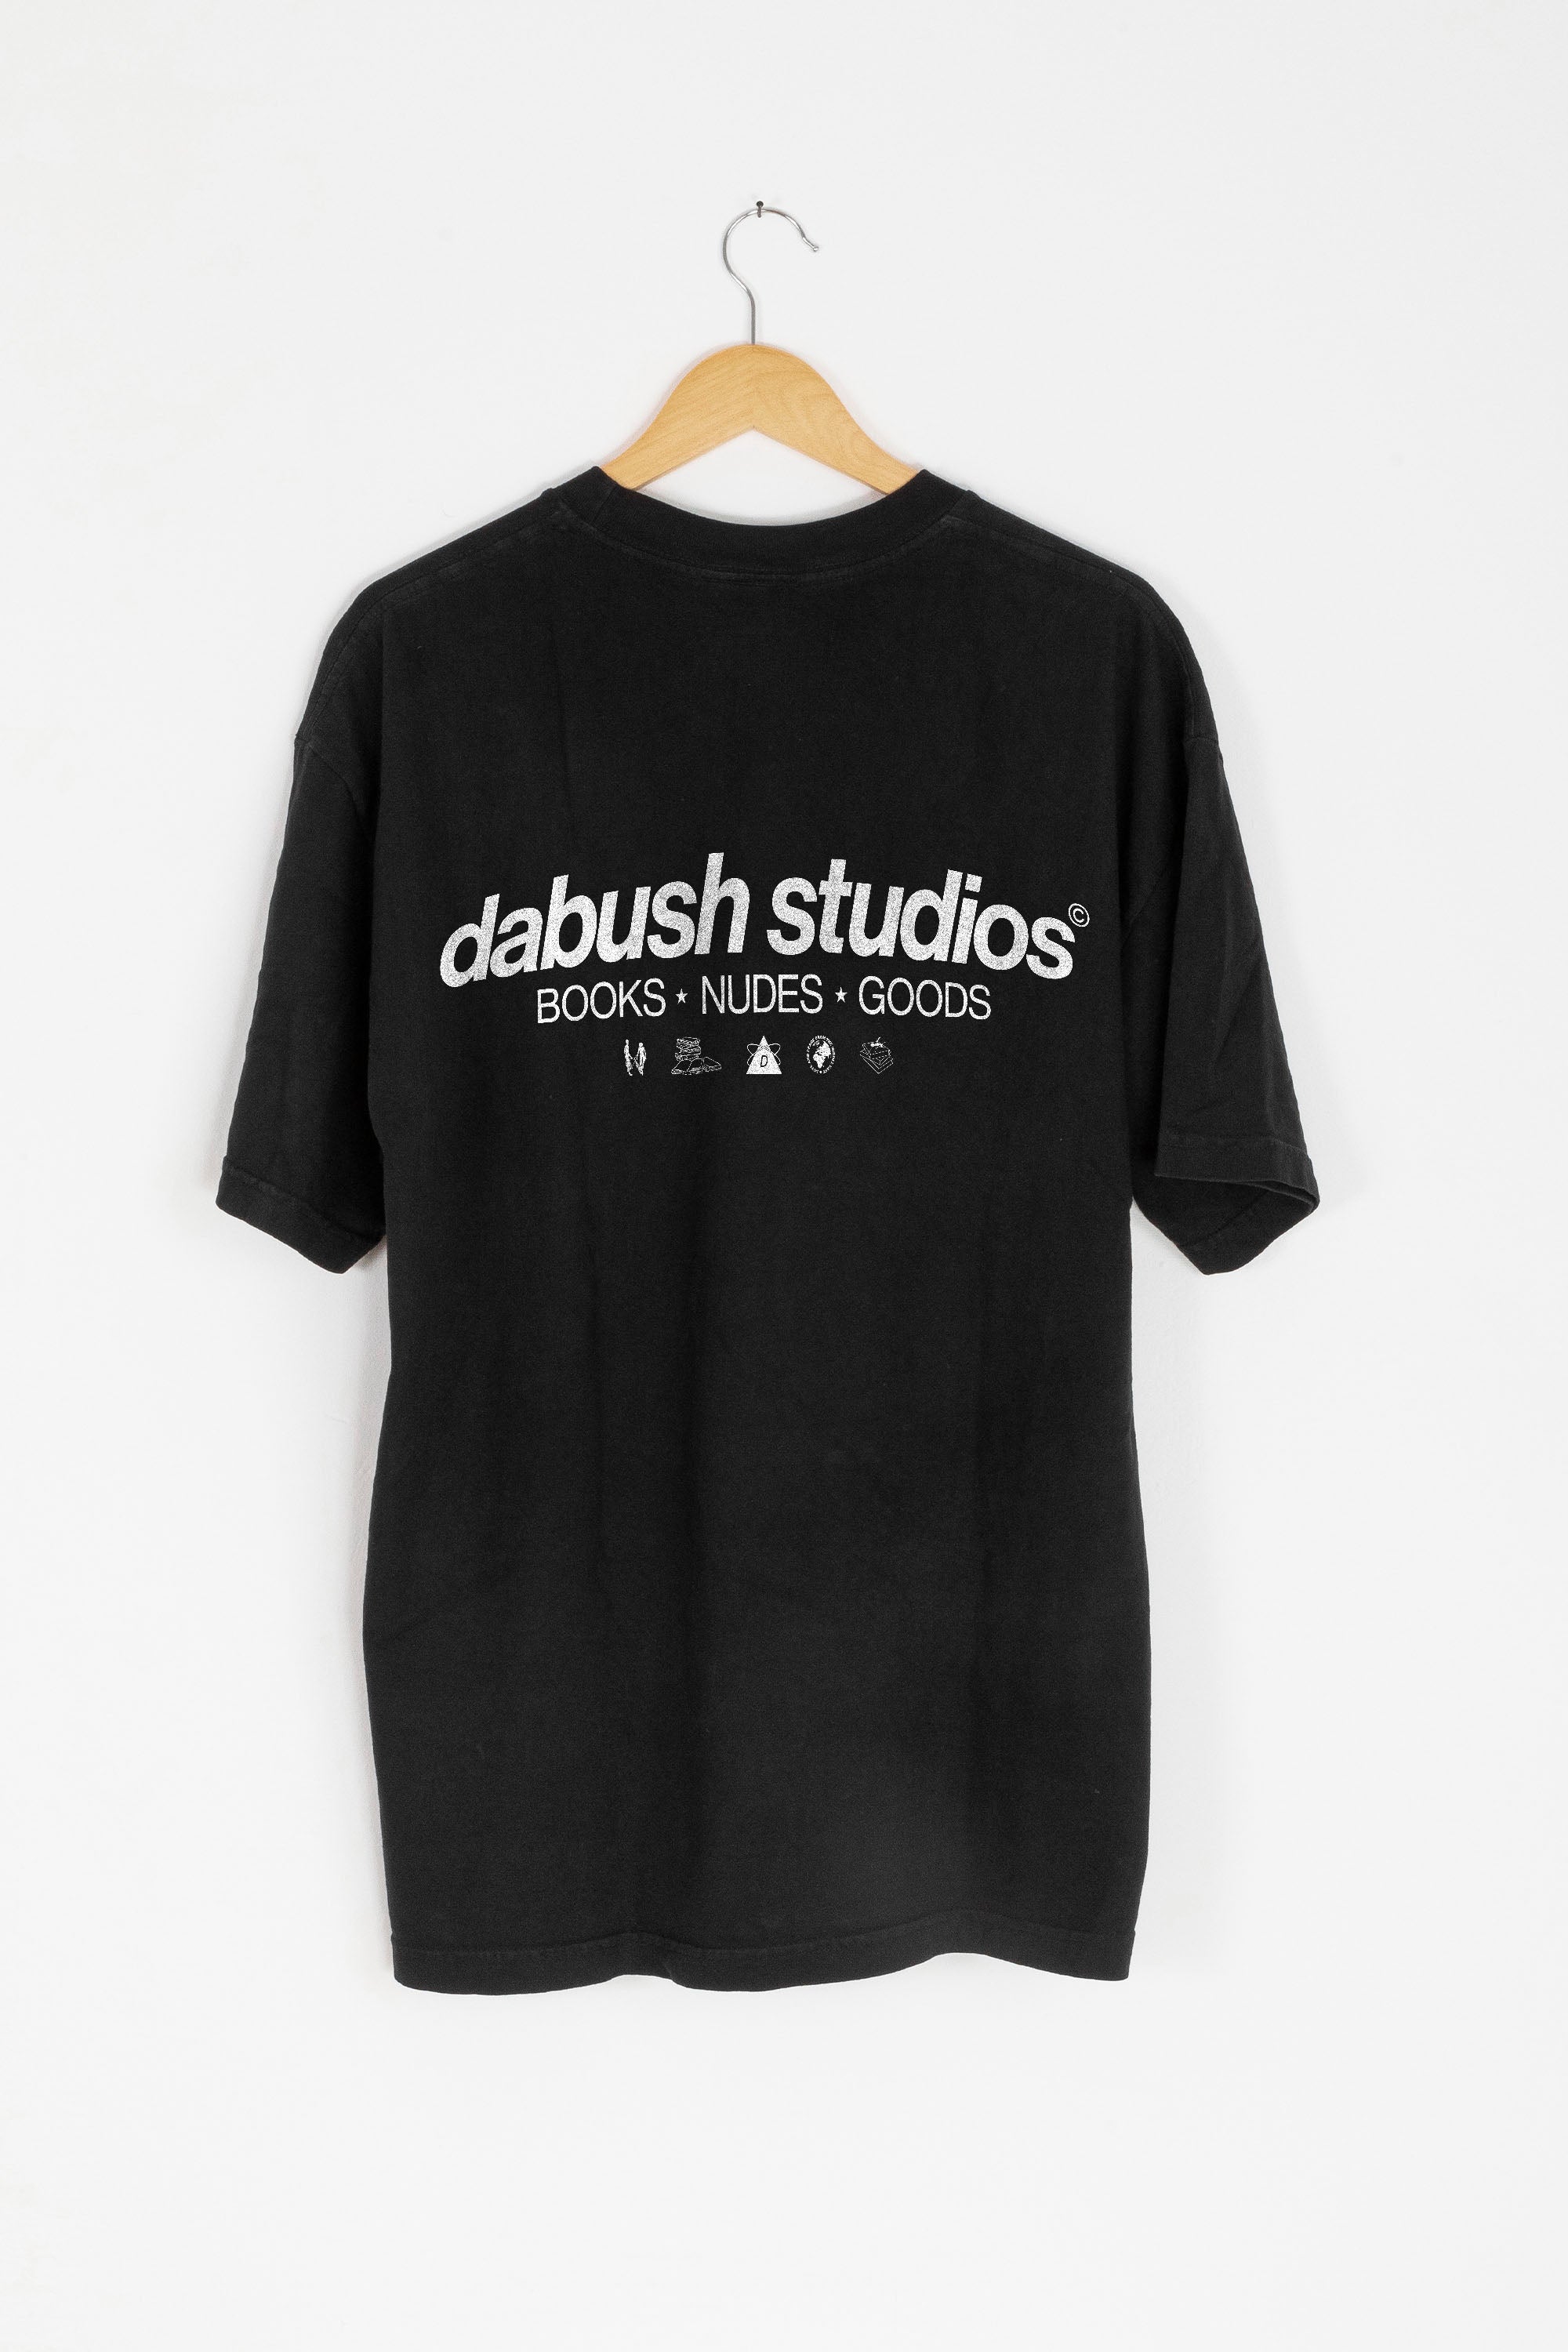 DABUSH T-SHIRT. 100% Cotton, oversized tee with Back and front print. Made in Tel aviv. Shop and view the latest Drops from the official DABUSH website. Worldwide Shipping. DABUSH is a publishing house, design studio and a brand based in Tel Aviv, Israel.